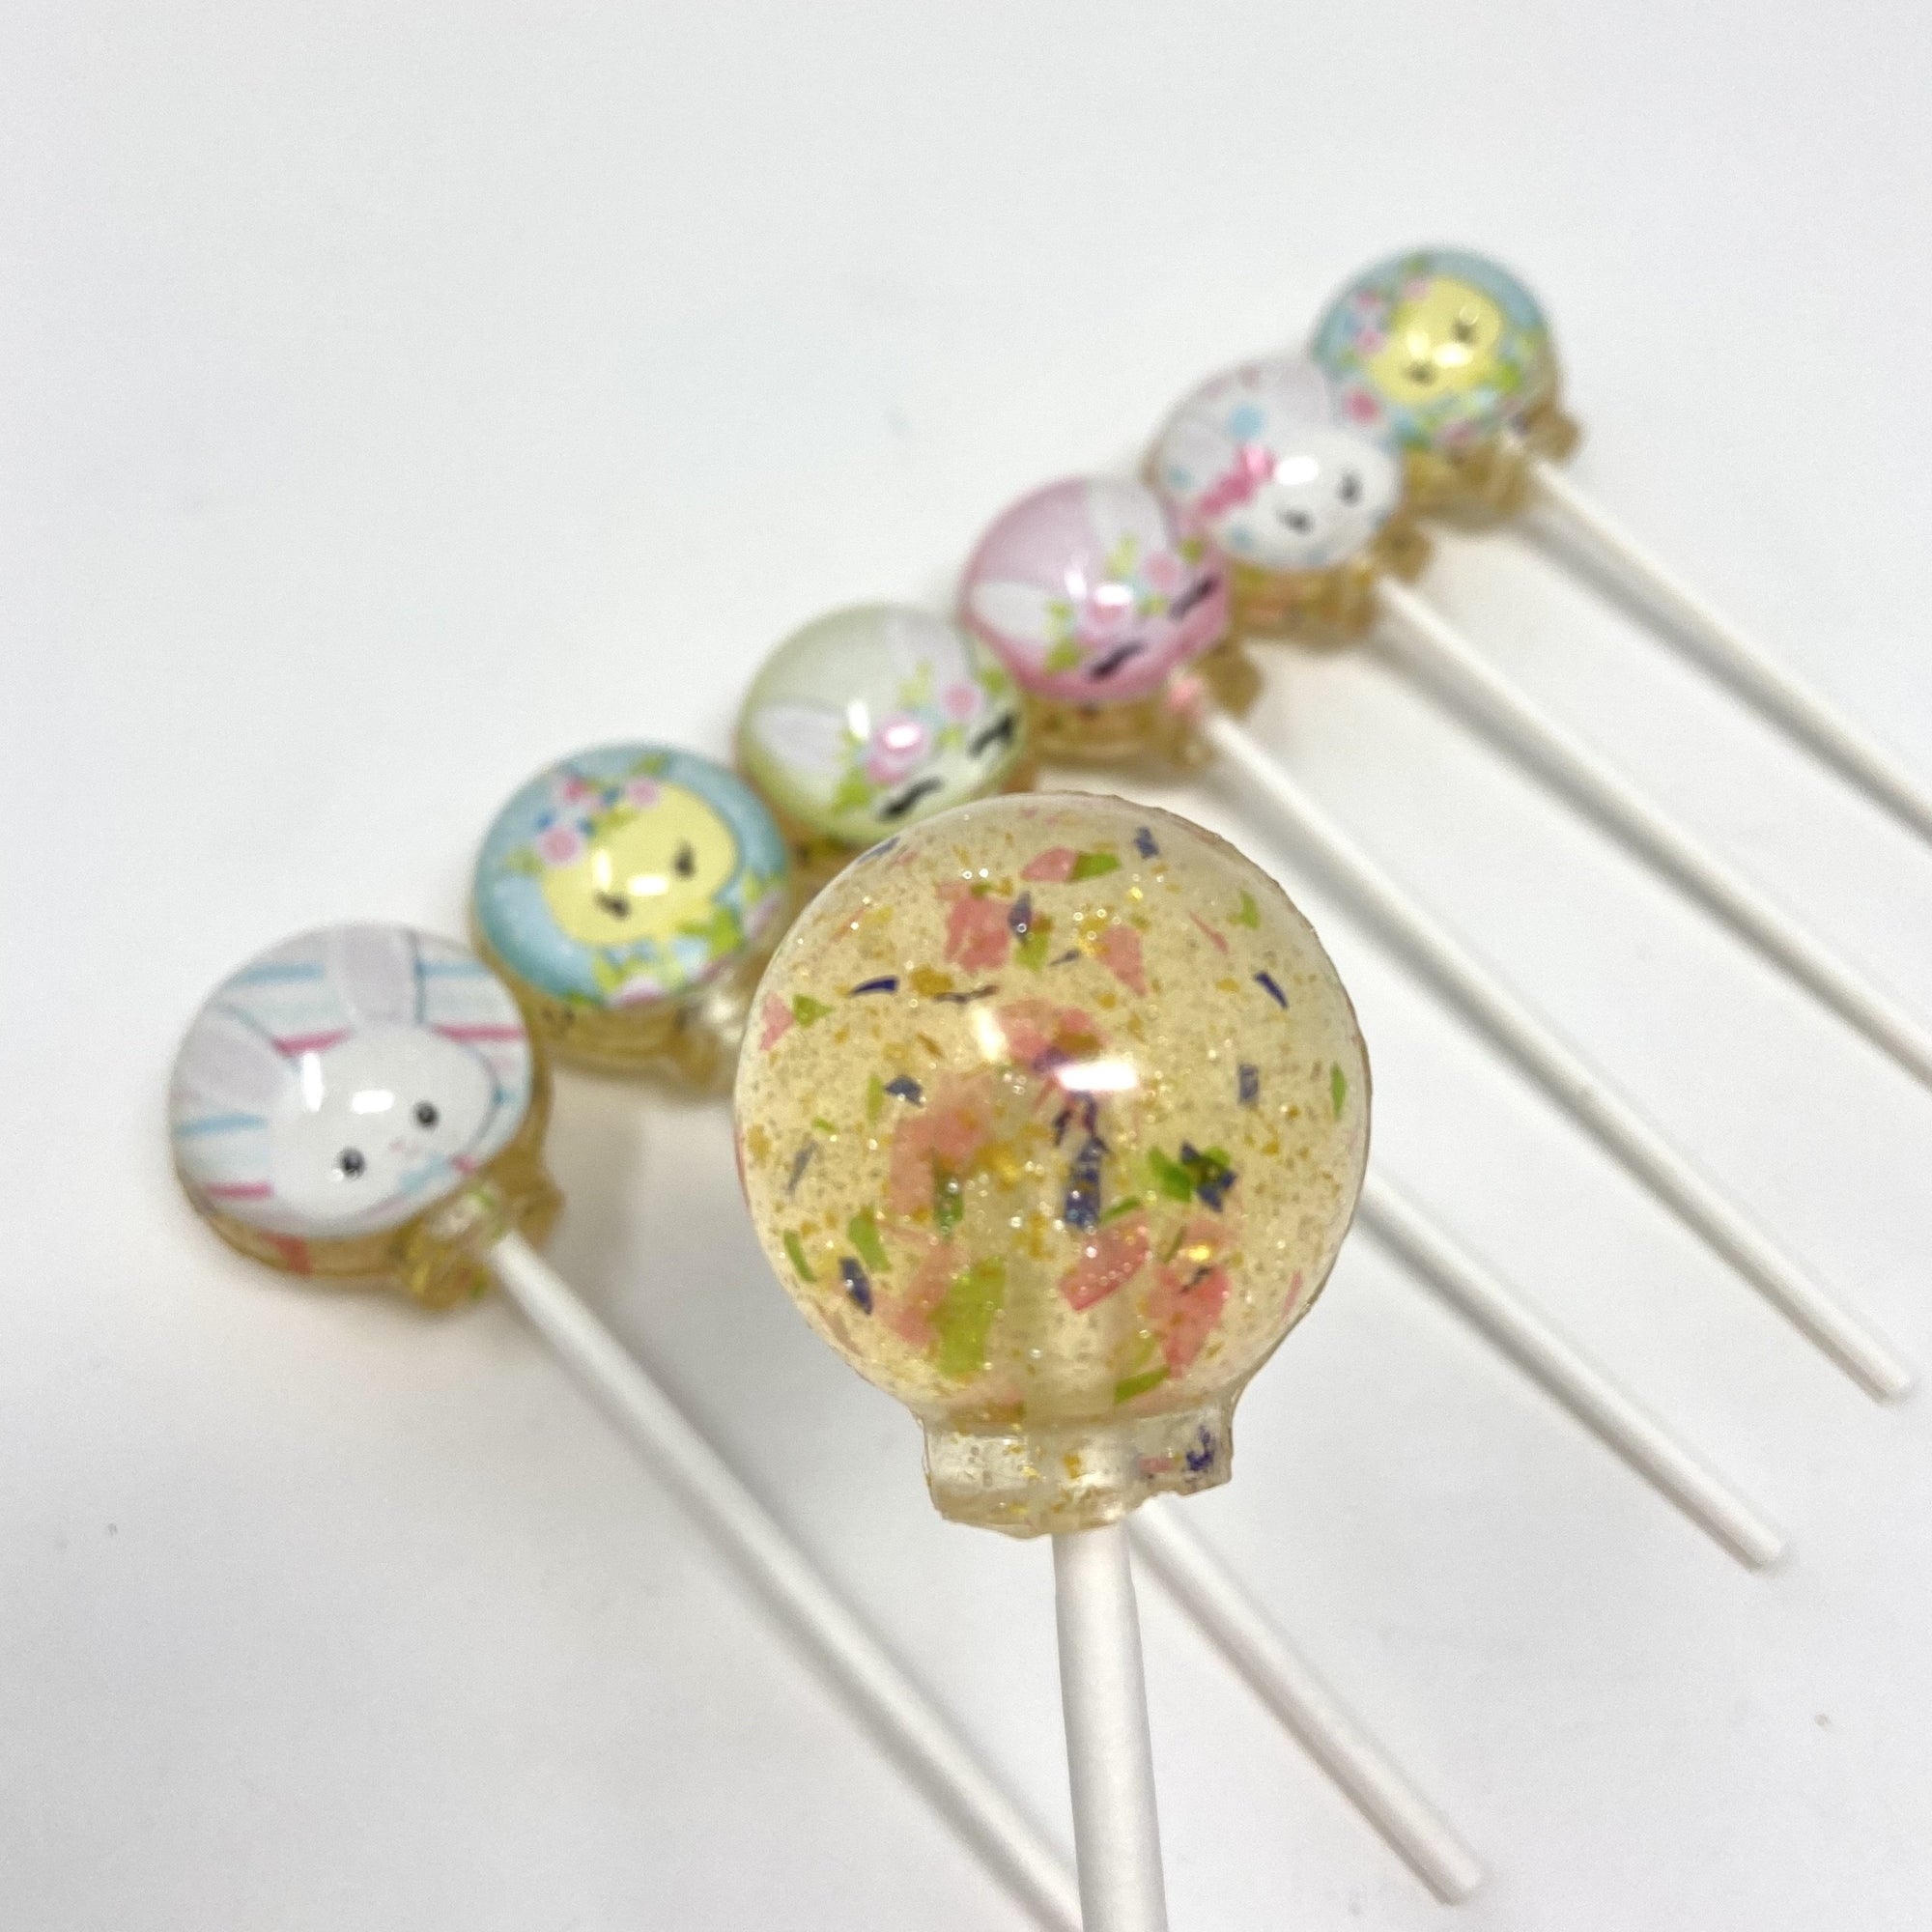 Chicks and Bunnies Lollipops 6-piece set by I Want Candy!